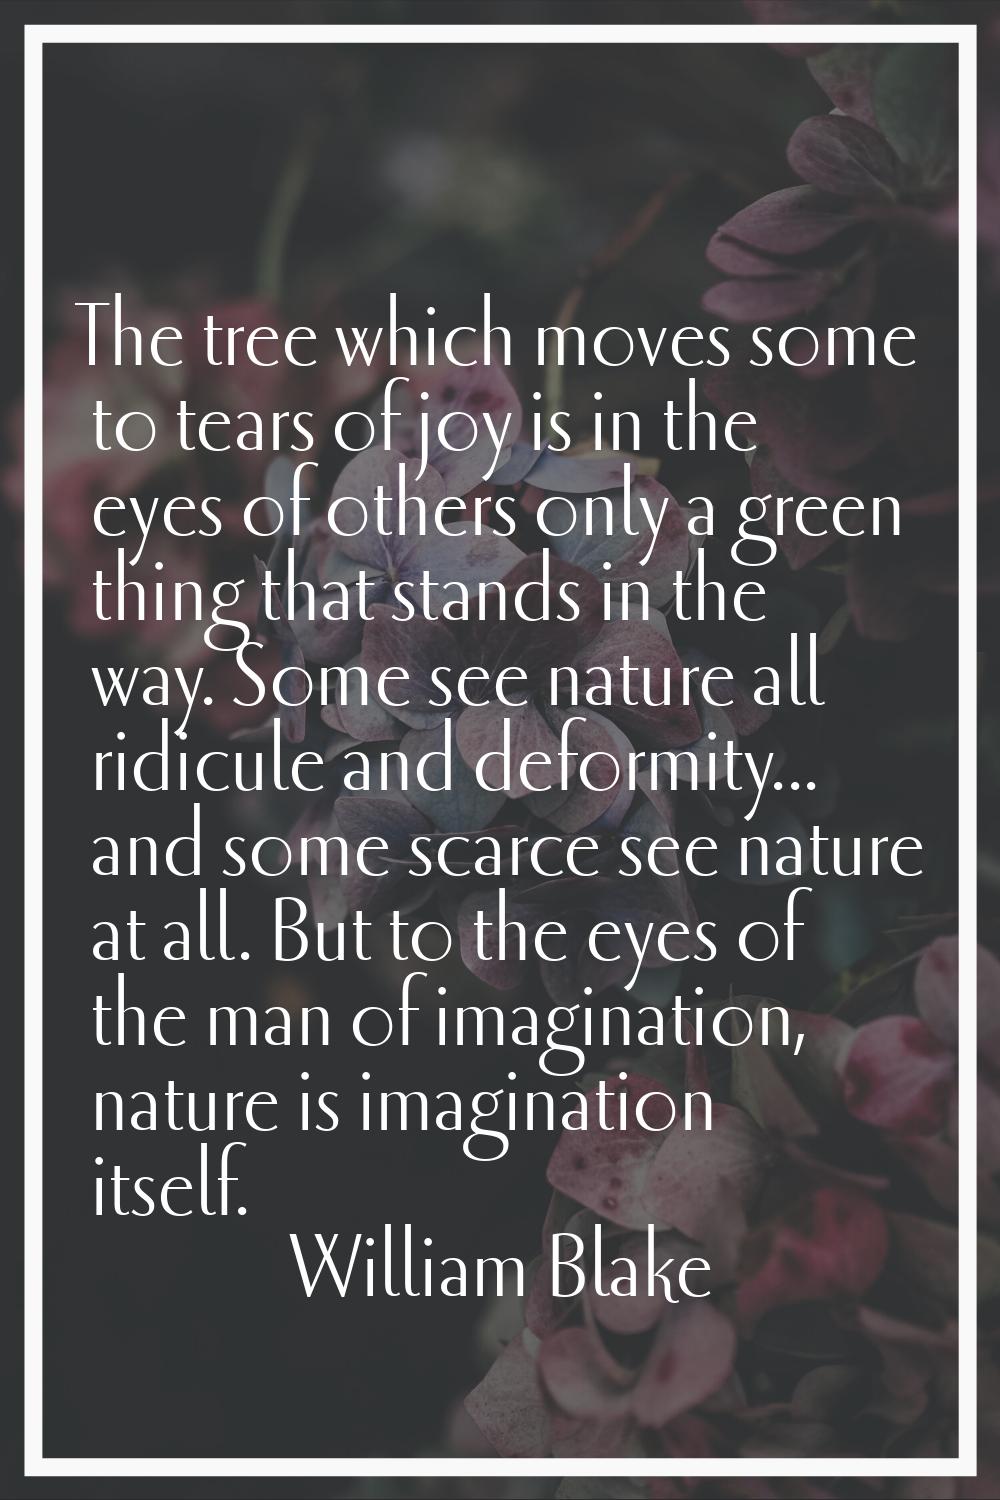 The tree which moves some to tears of joy is in the eyes of others only a green thing that stands i